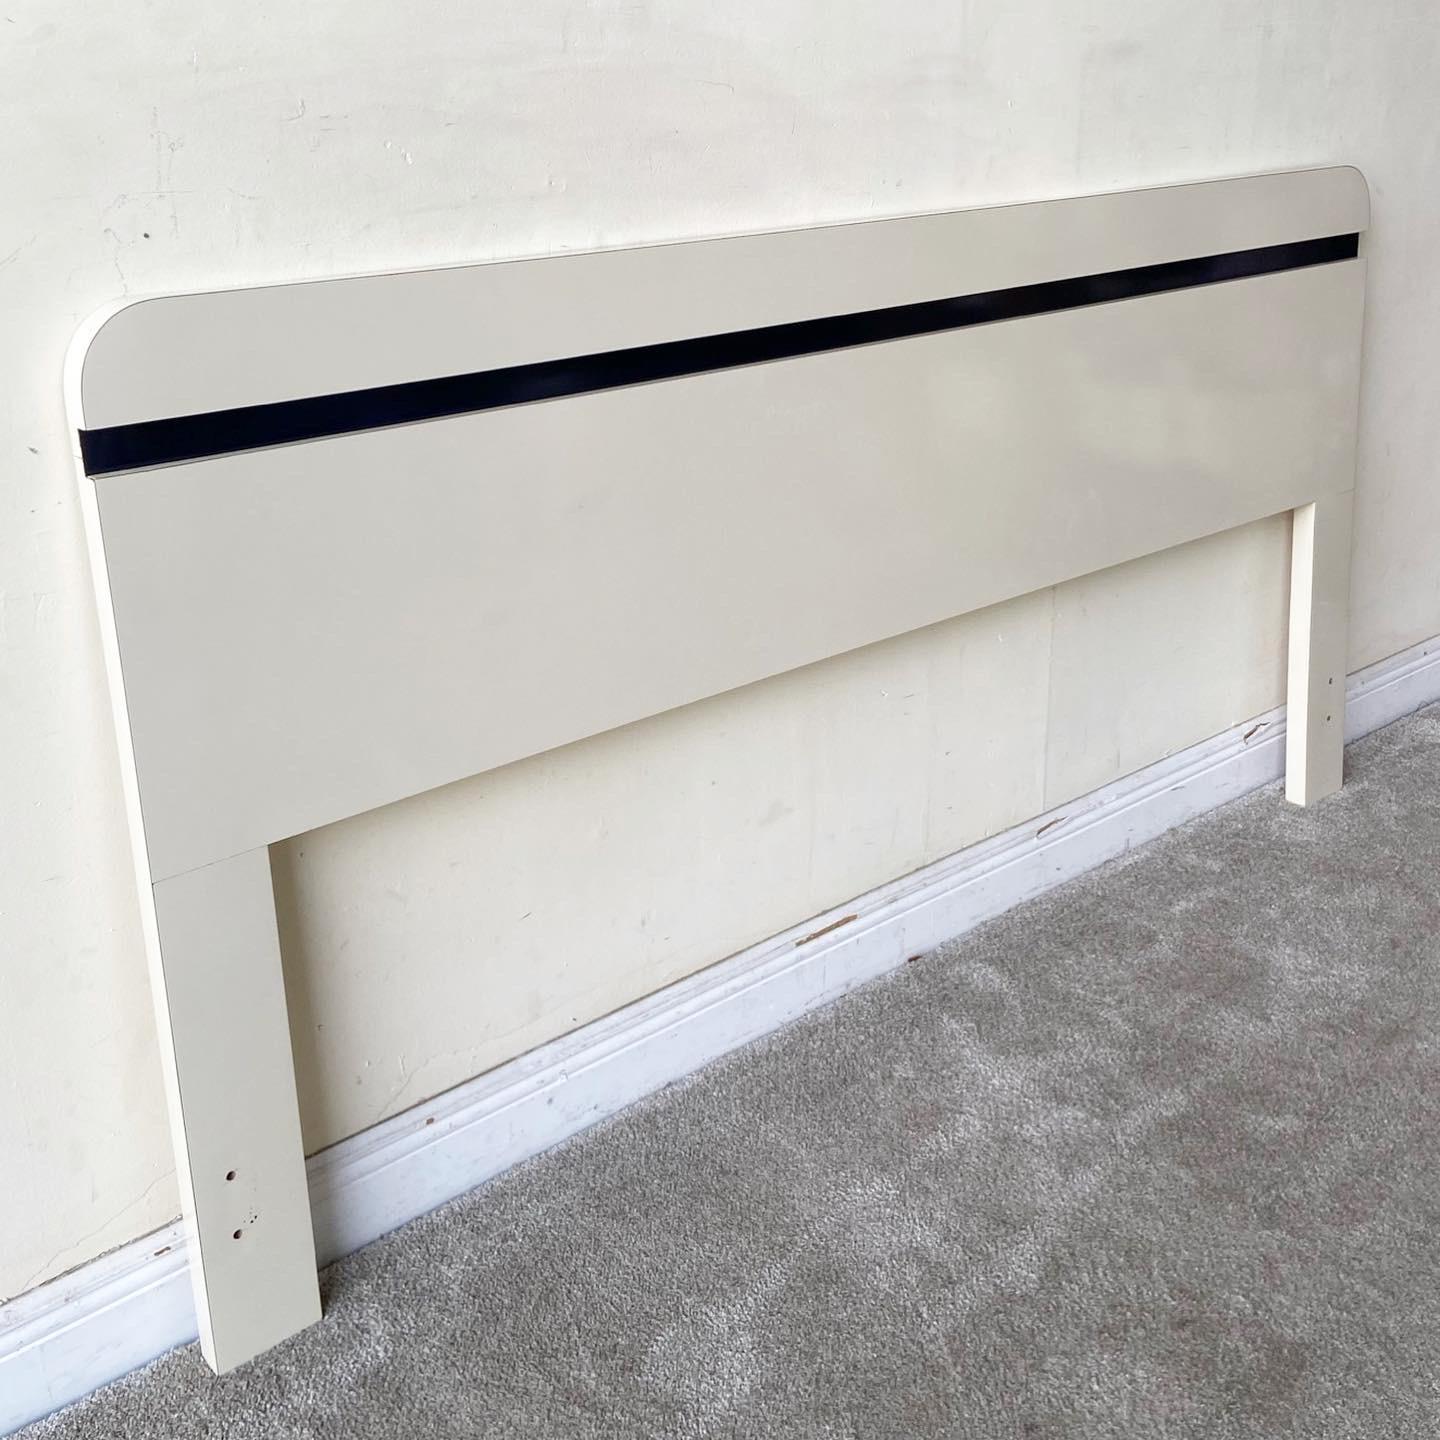 Incredible postmodern king size headboard. features a cream and navy blue lacquer laminate.